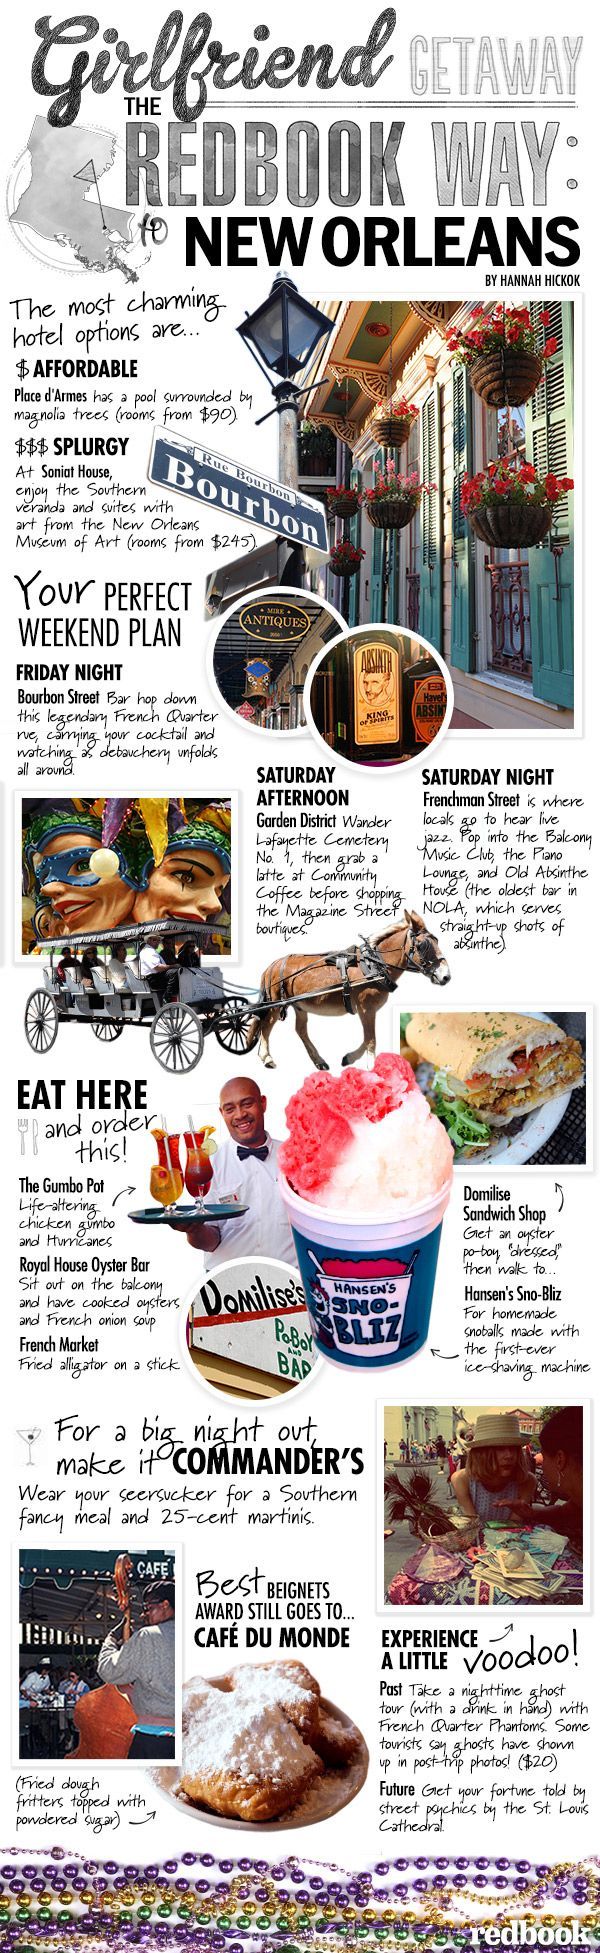 New Orleans Travel Guide – What To Do, See, Eat, and Drink in NOLA – Redbook